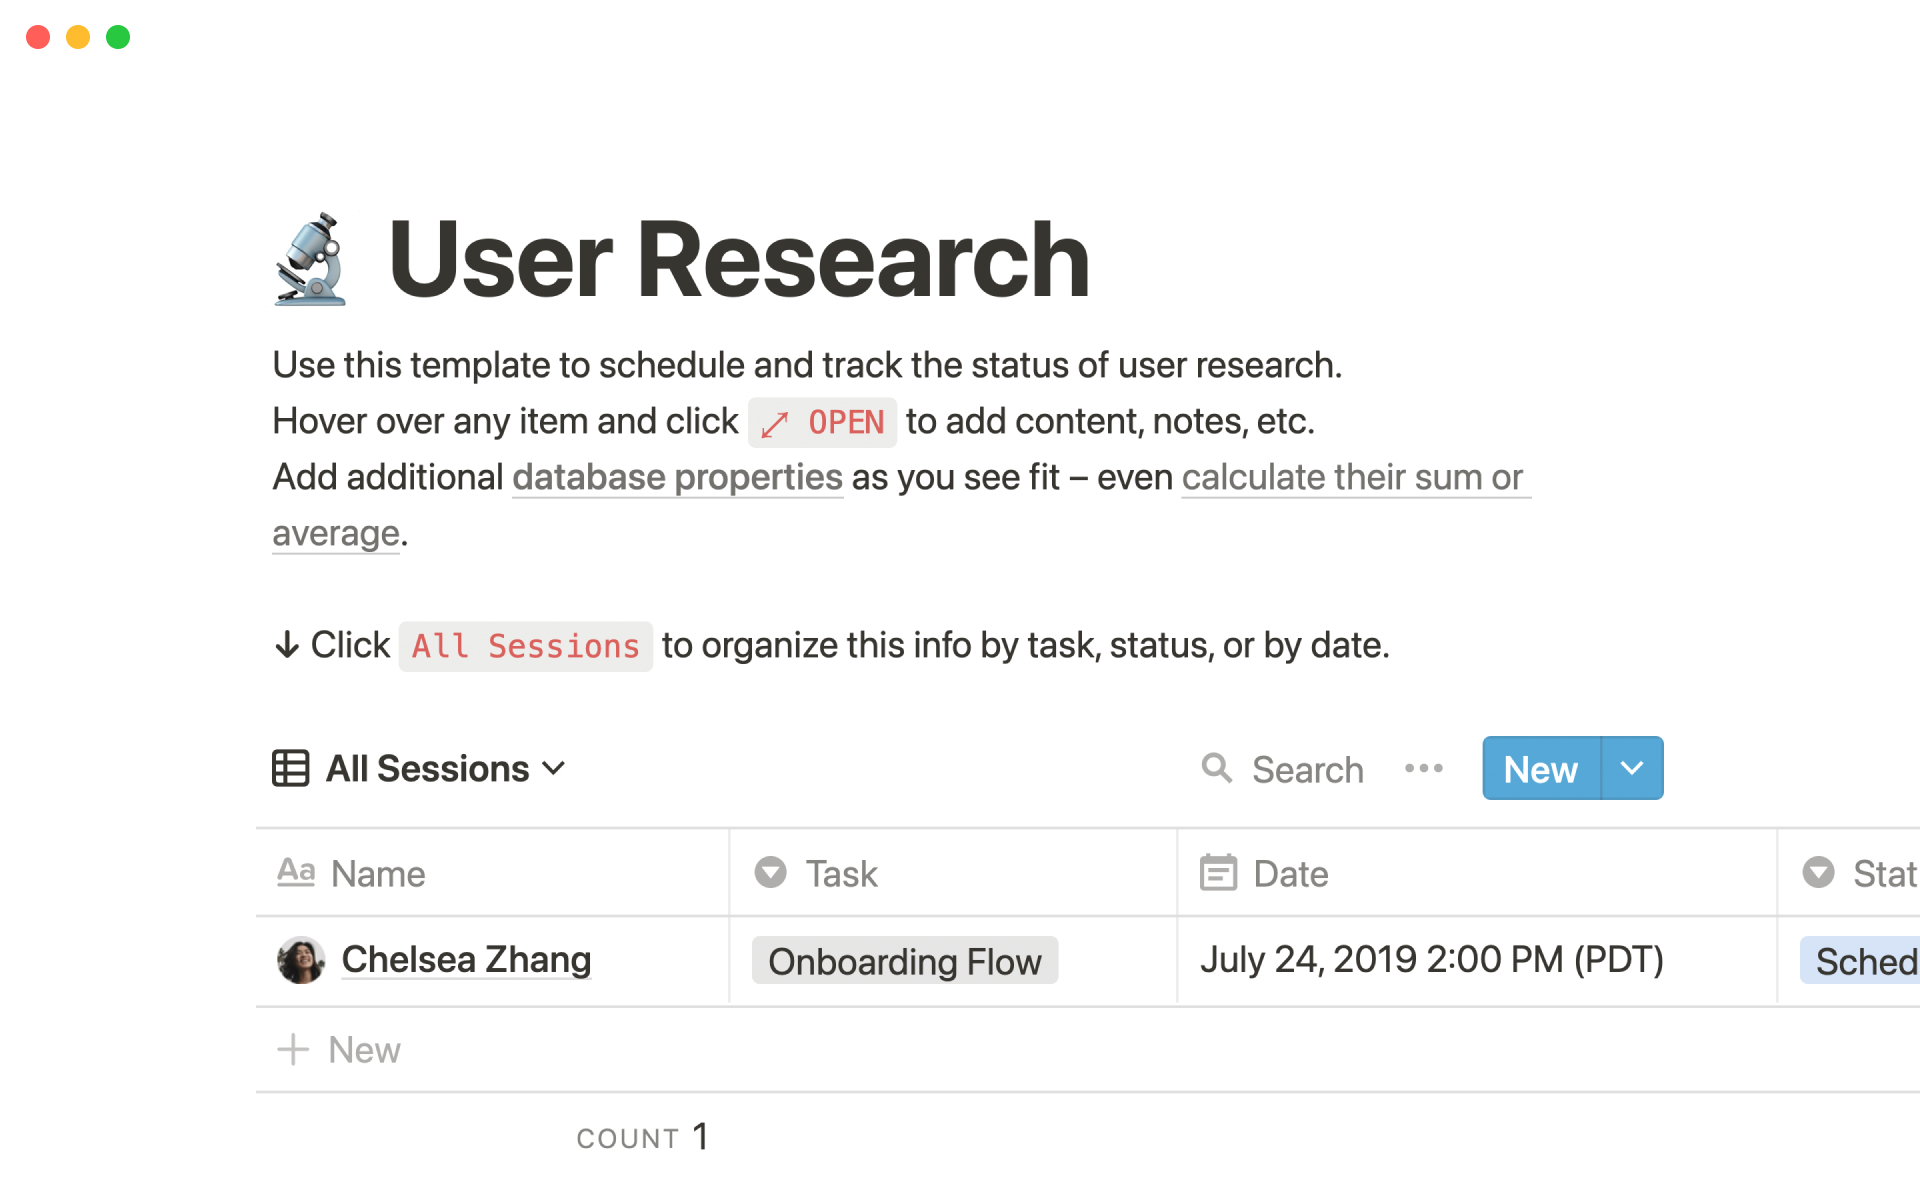 Schedule and track the status of user research.